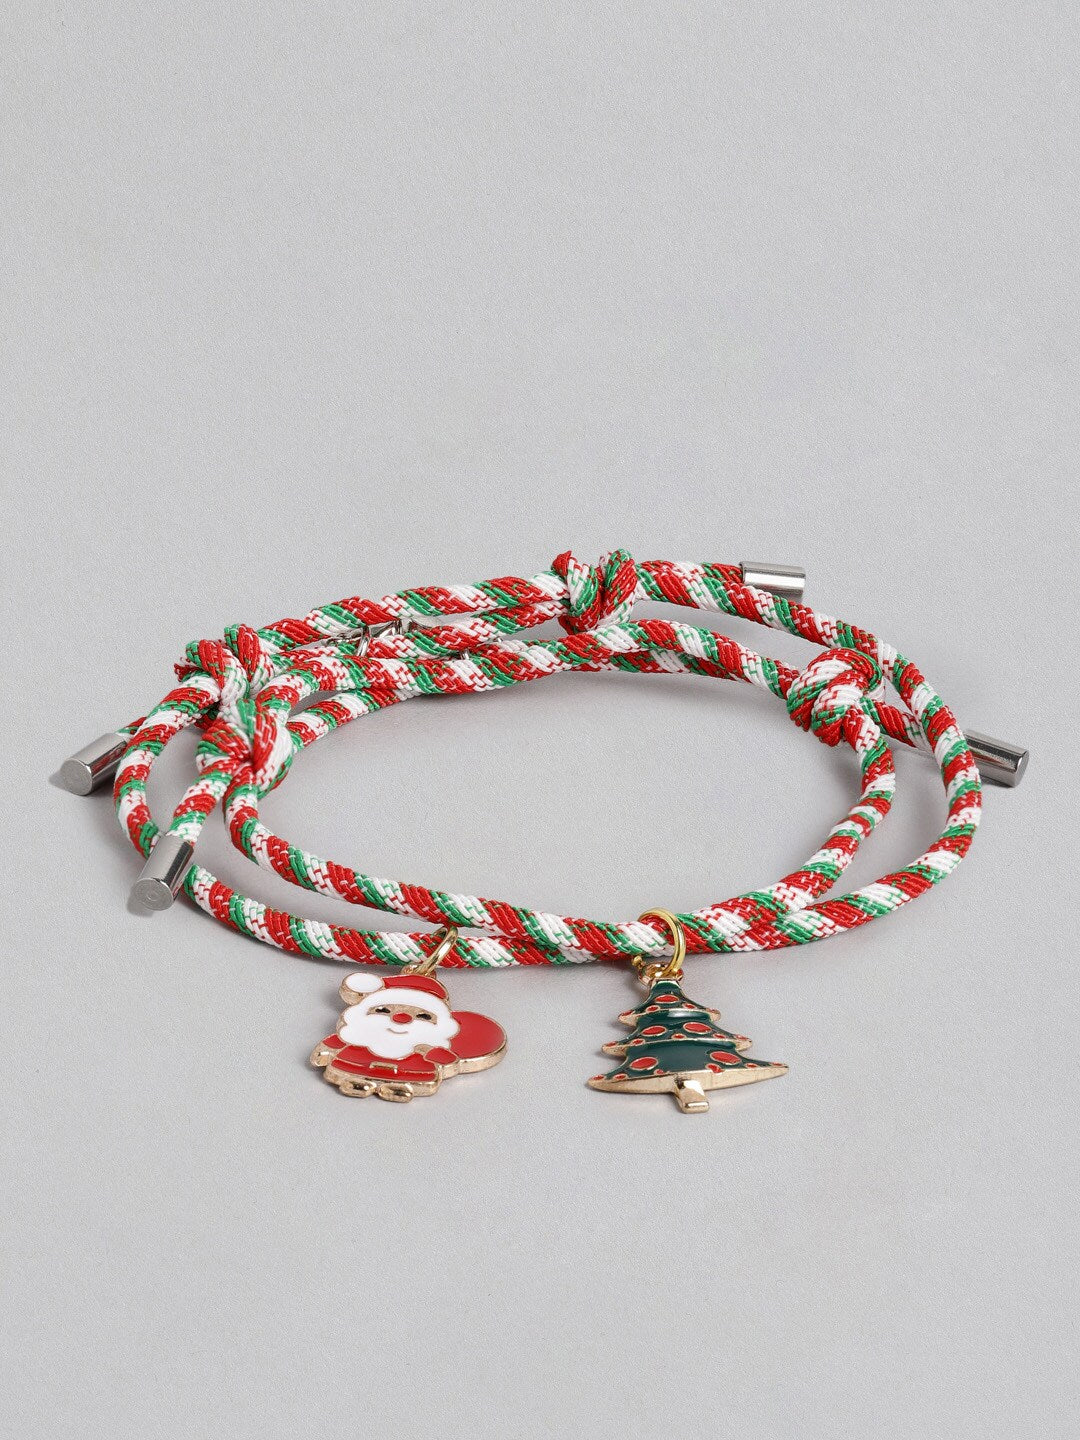 EL REGALO Boys Set of 2 Red & Green Handcrafted Christmas Charm Bracelet - for Kids-Boys
Style ID: 16186542